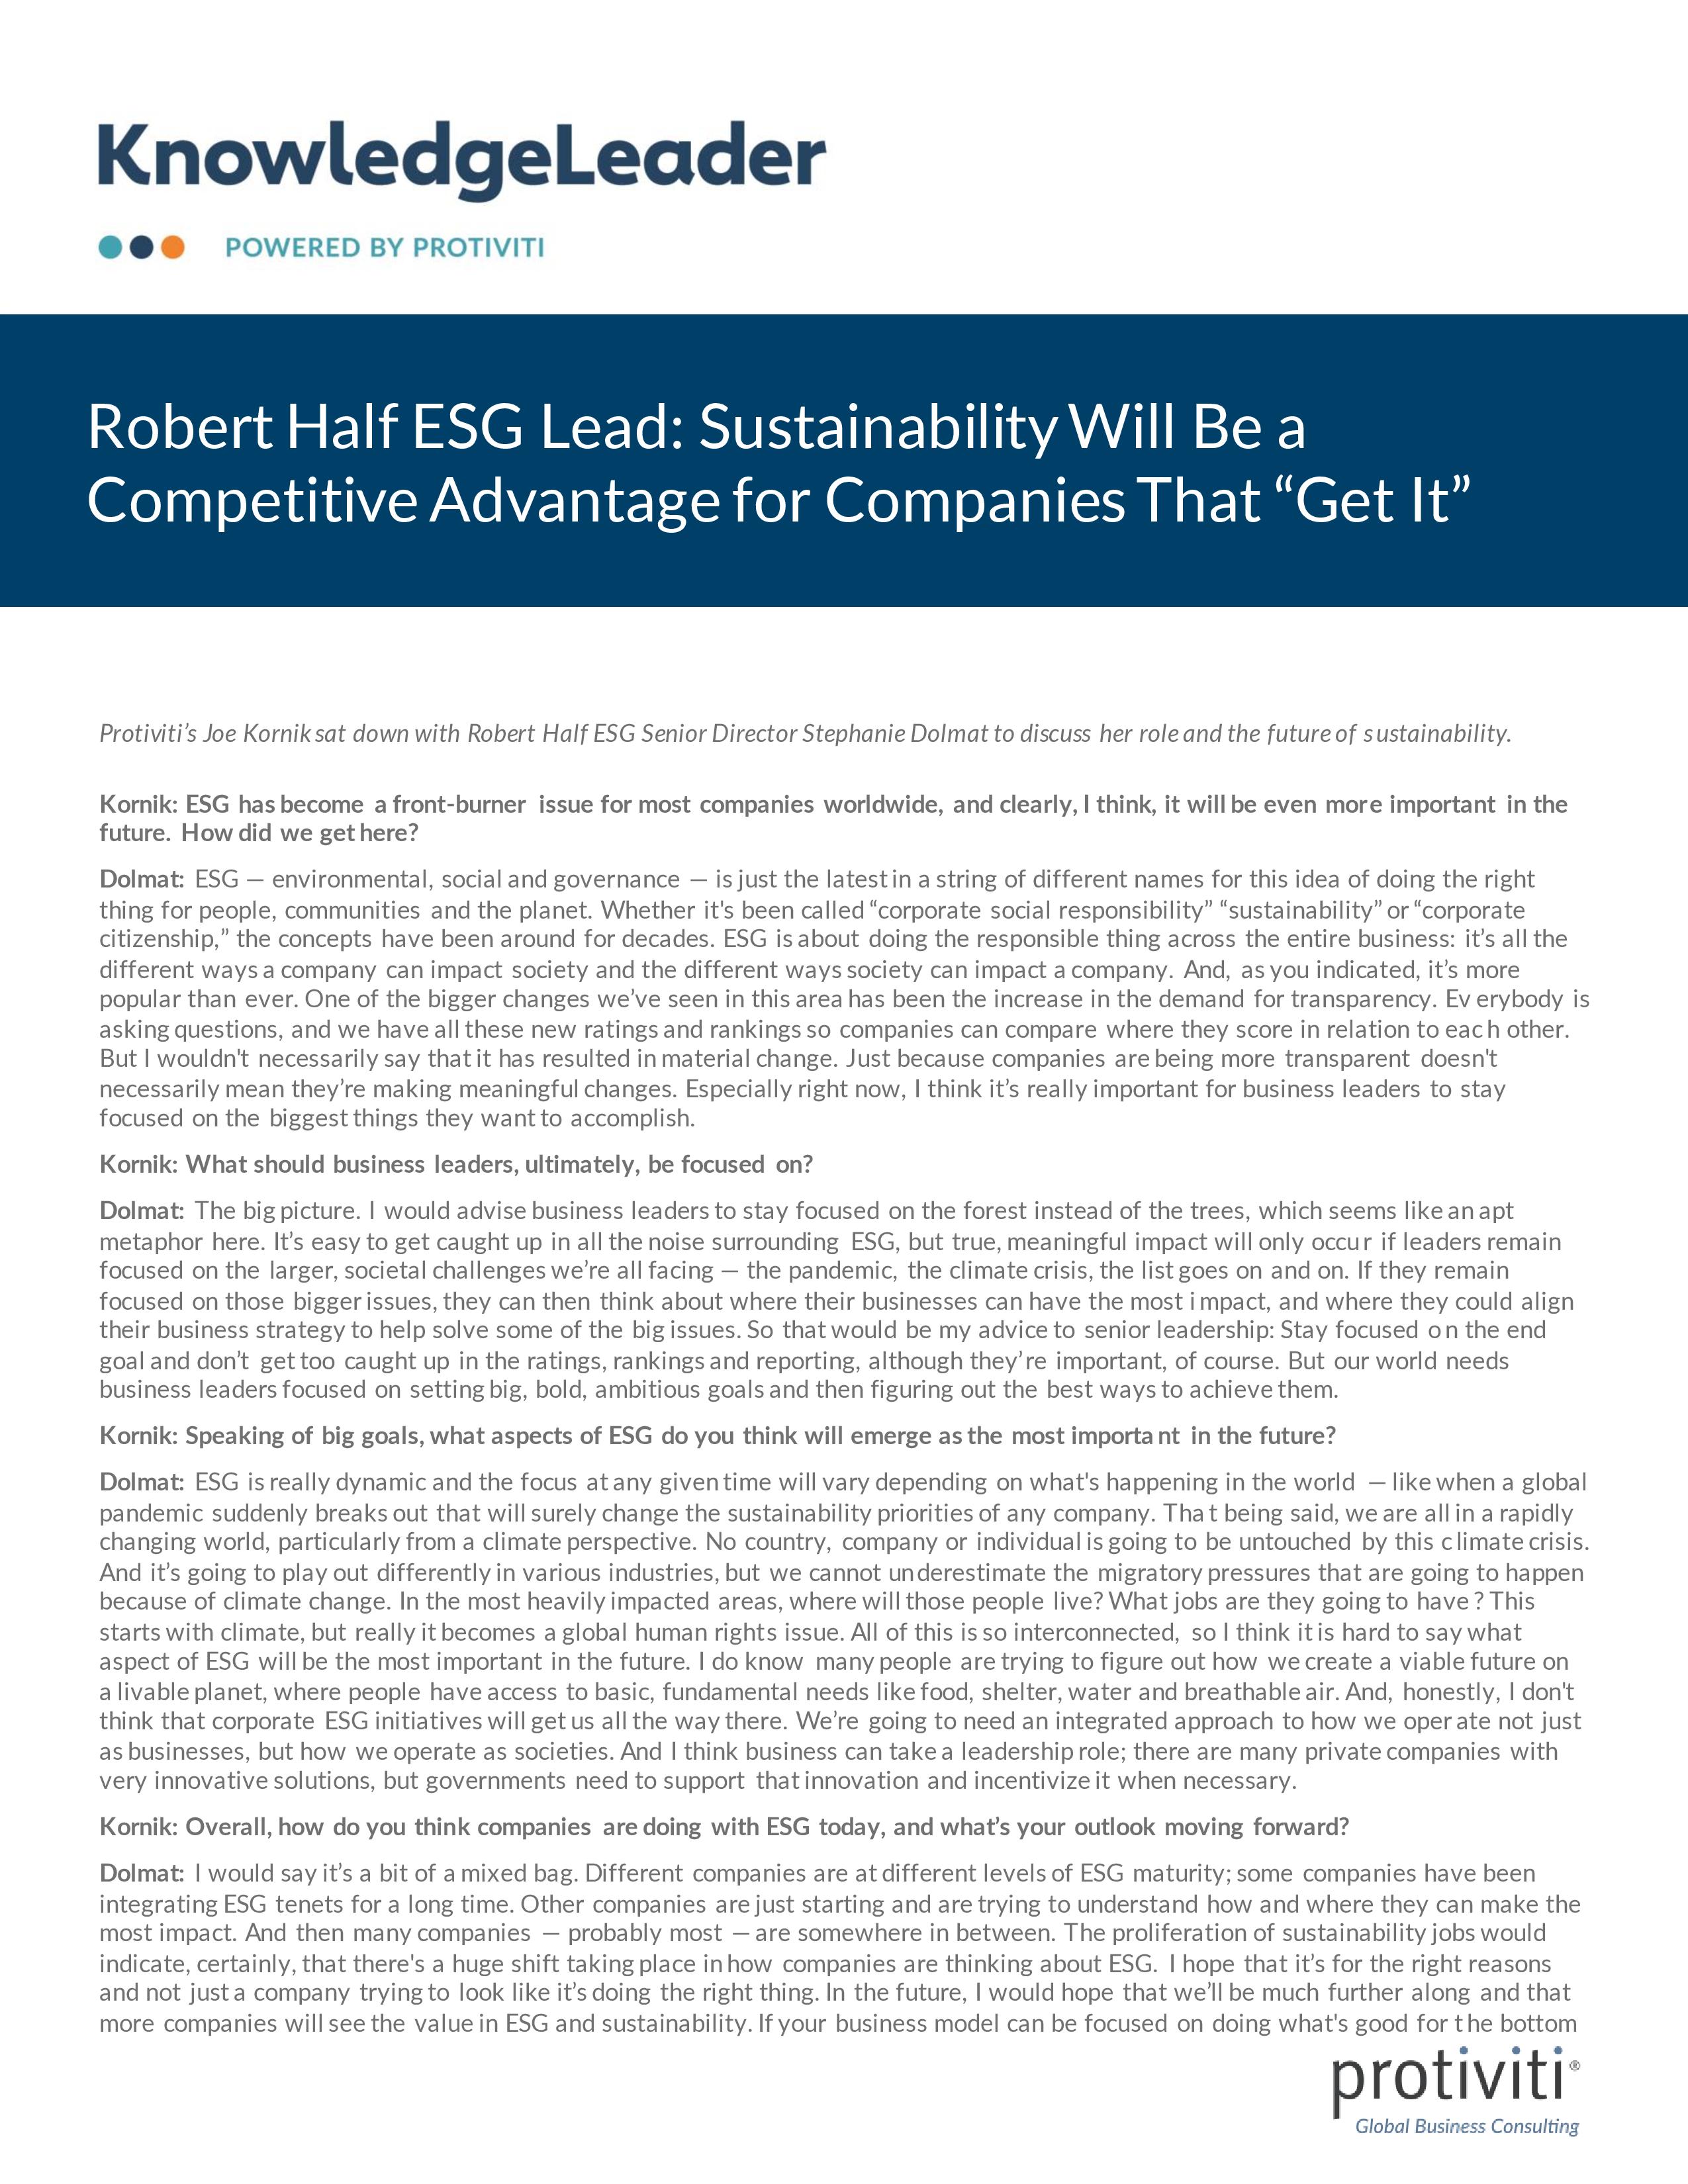 Screenshot of the first page of Robert Half ESG Lead Sustainability Will Be a Competitive Advantage for Companies That “Get It”